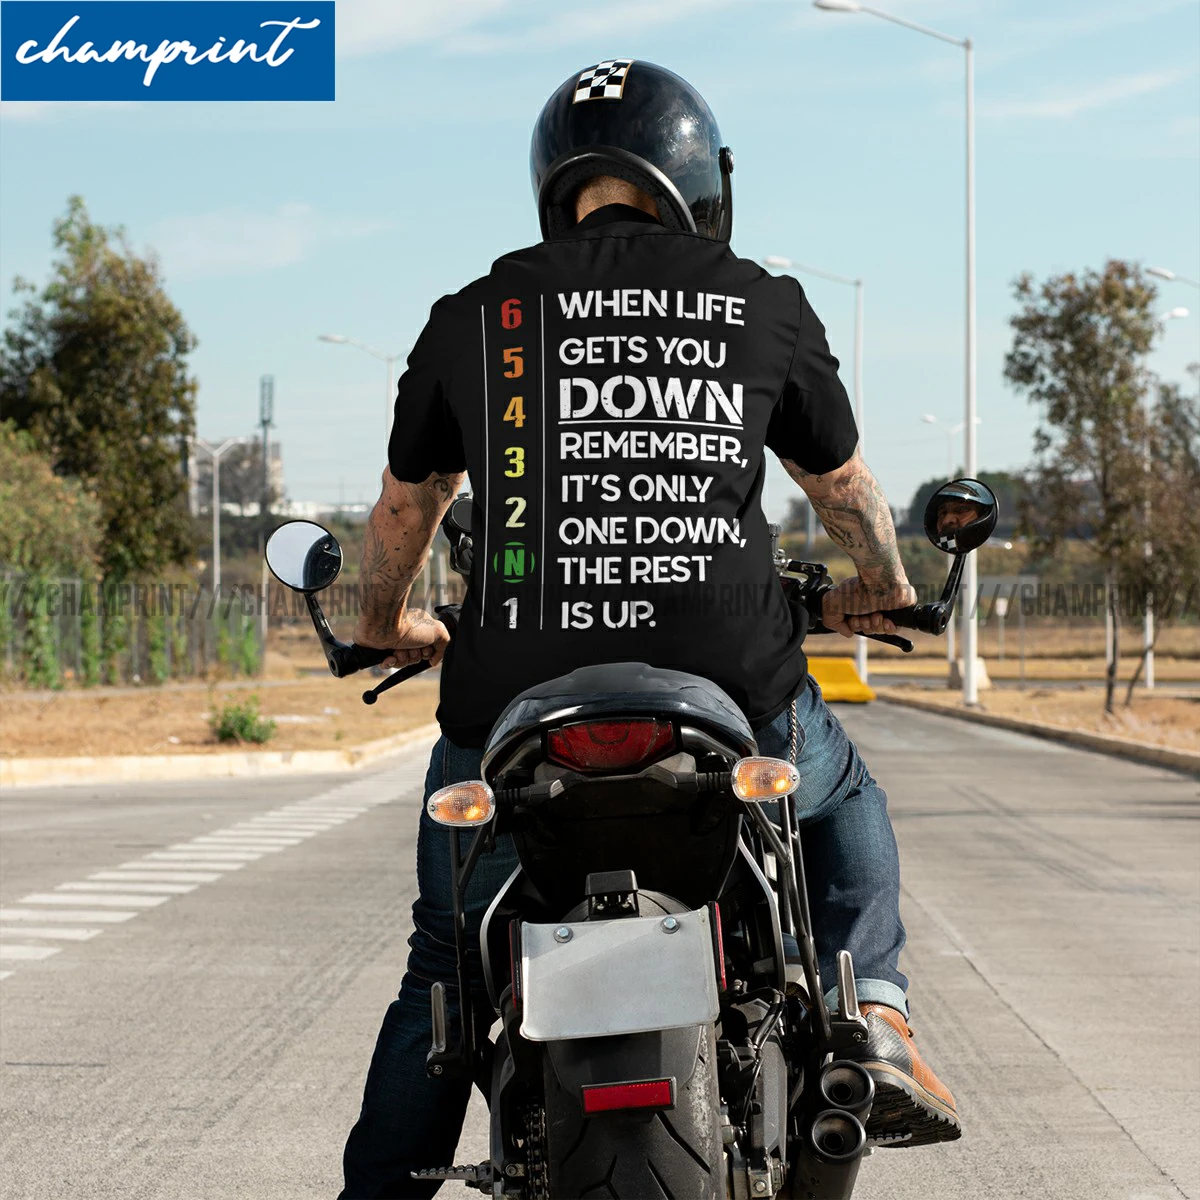 

When Life Gets You Down Remember It's Only One Down T Shirts Men's Gear Motorcycle Motivational Tees Gift Idea Clothing 6XL